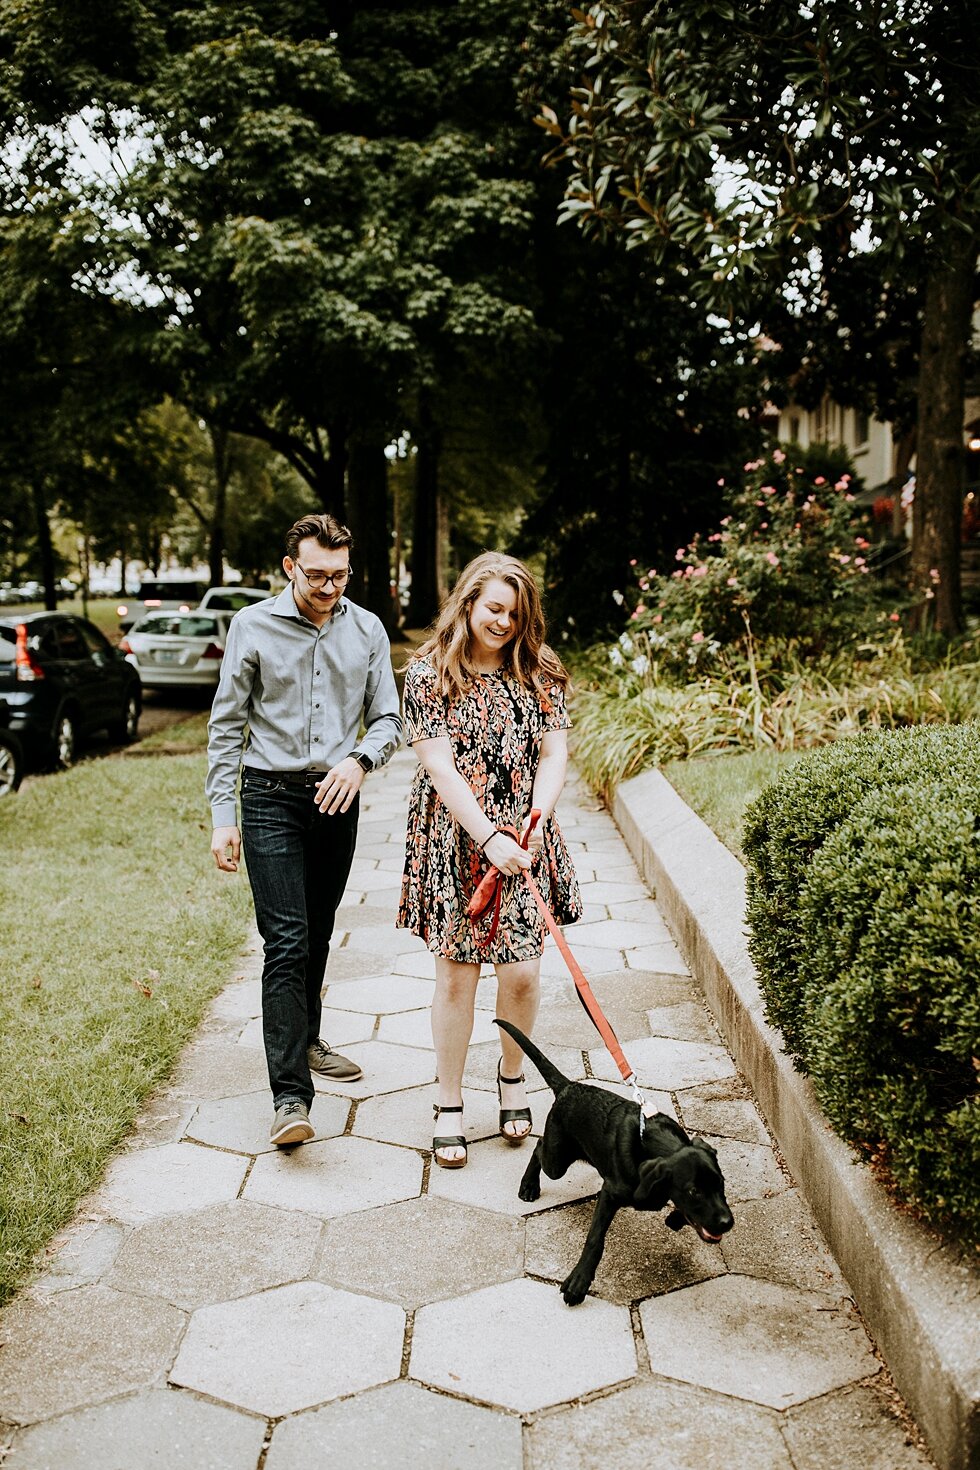  Engagement session with their dog walking down a stone path. getting married outdoor session engaged couple together wedding preparation love excited stunning relationship #engagementphotos #midwestphotographer #kywedding #louisville #stjamescourt #